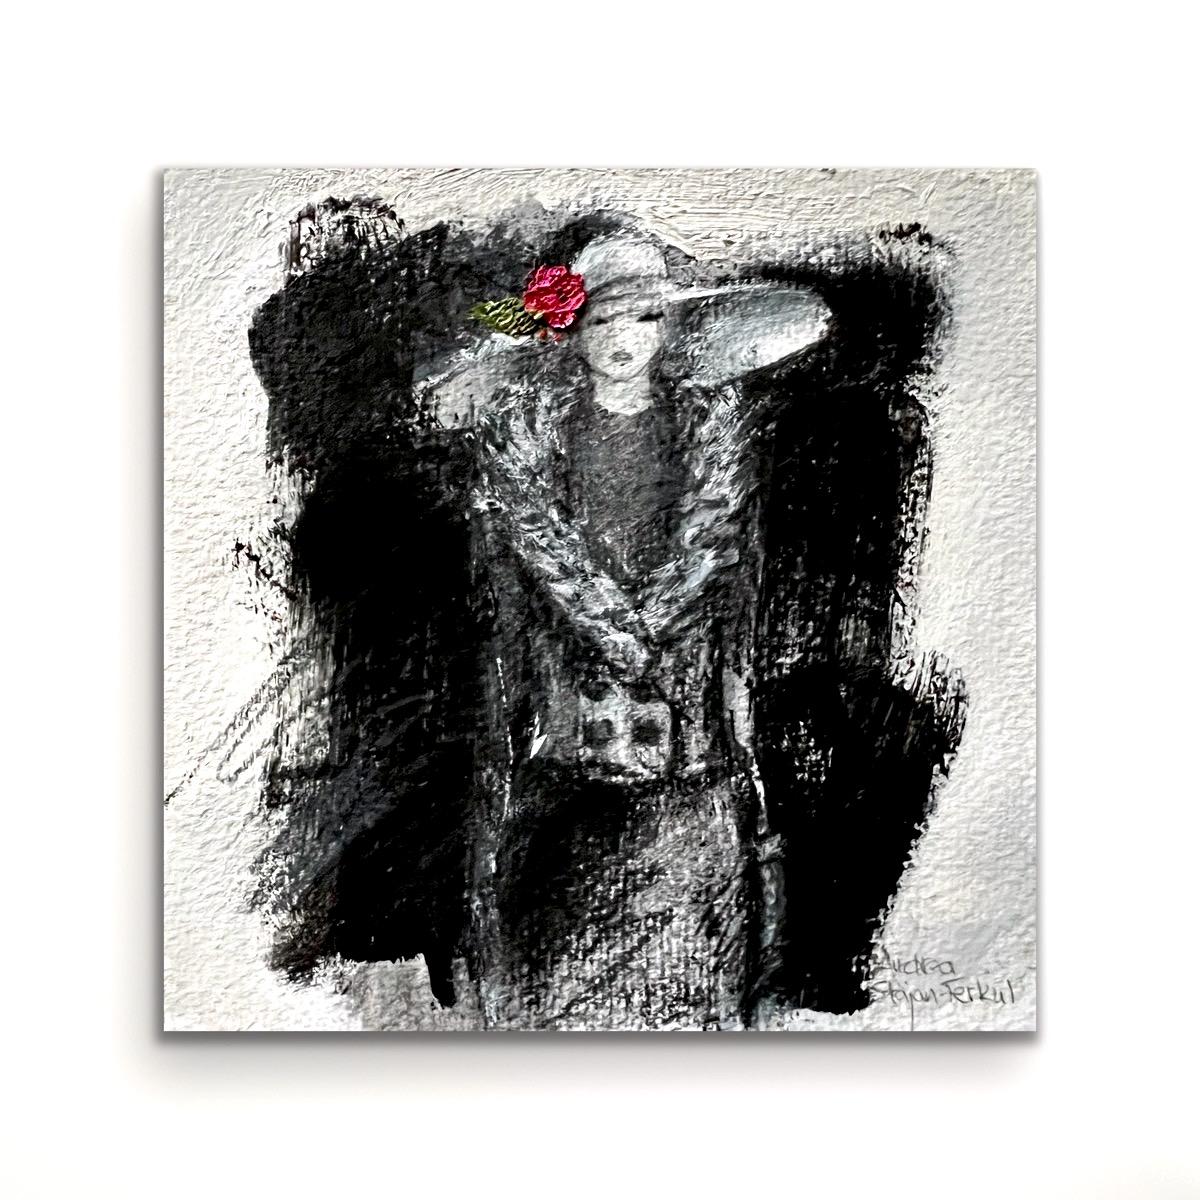 The Hat Lady - 5"x5" Framed Artwork (Black, White, Red, Figurative, Fashion)